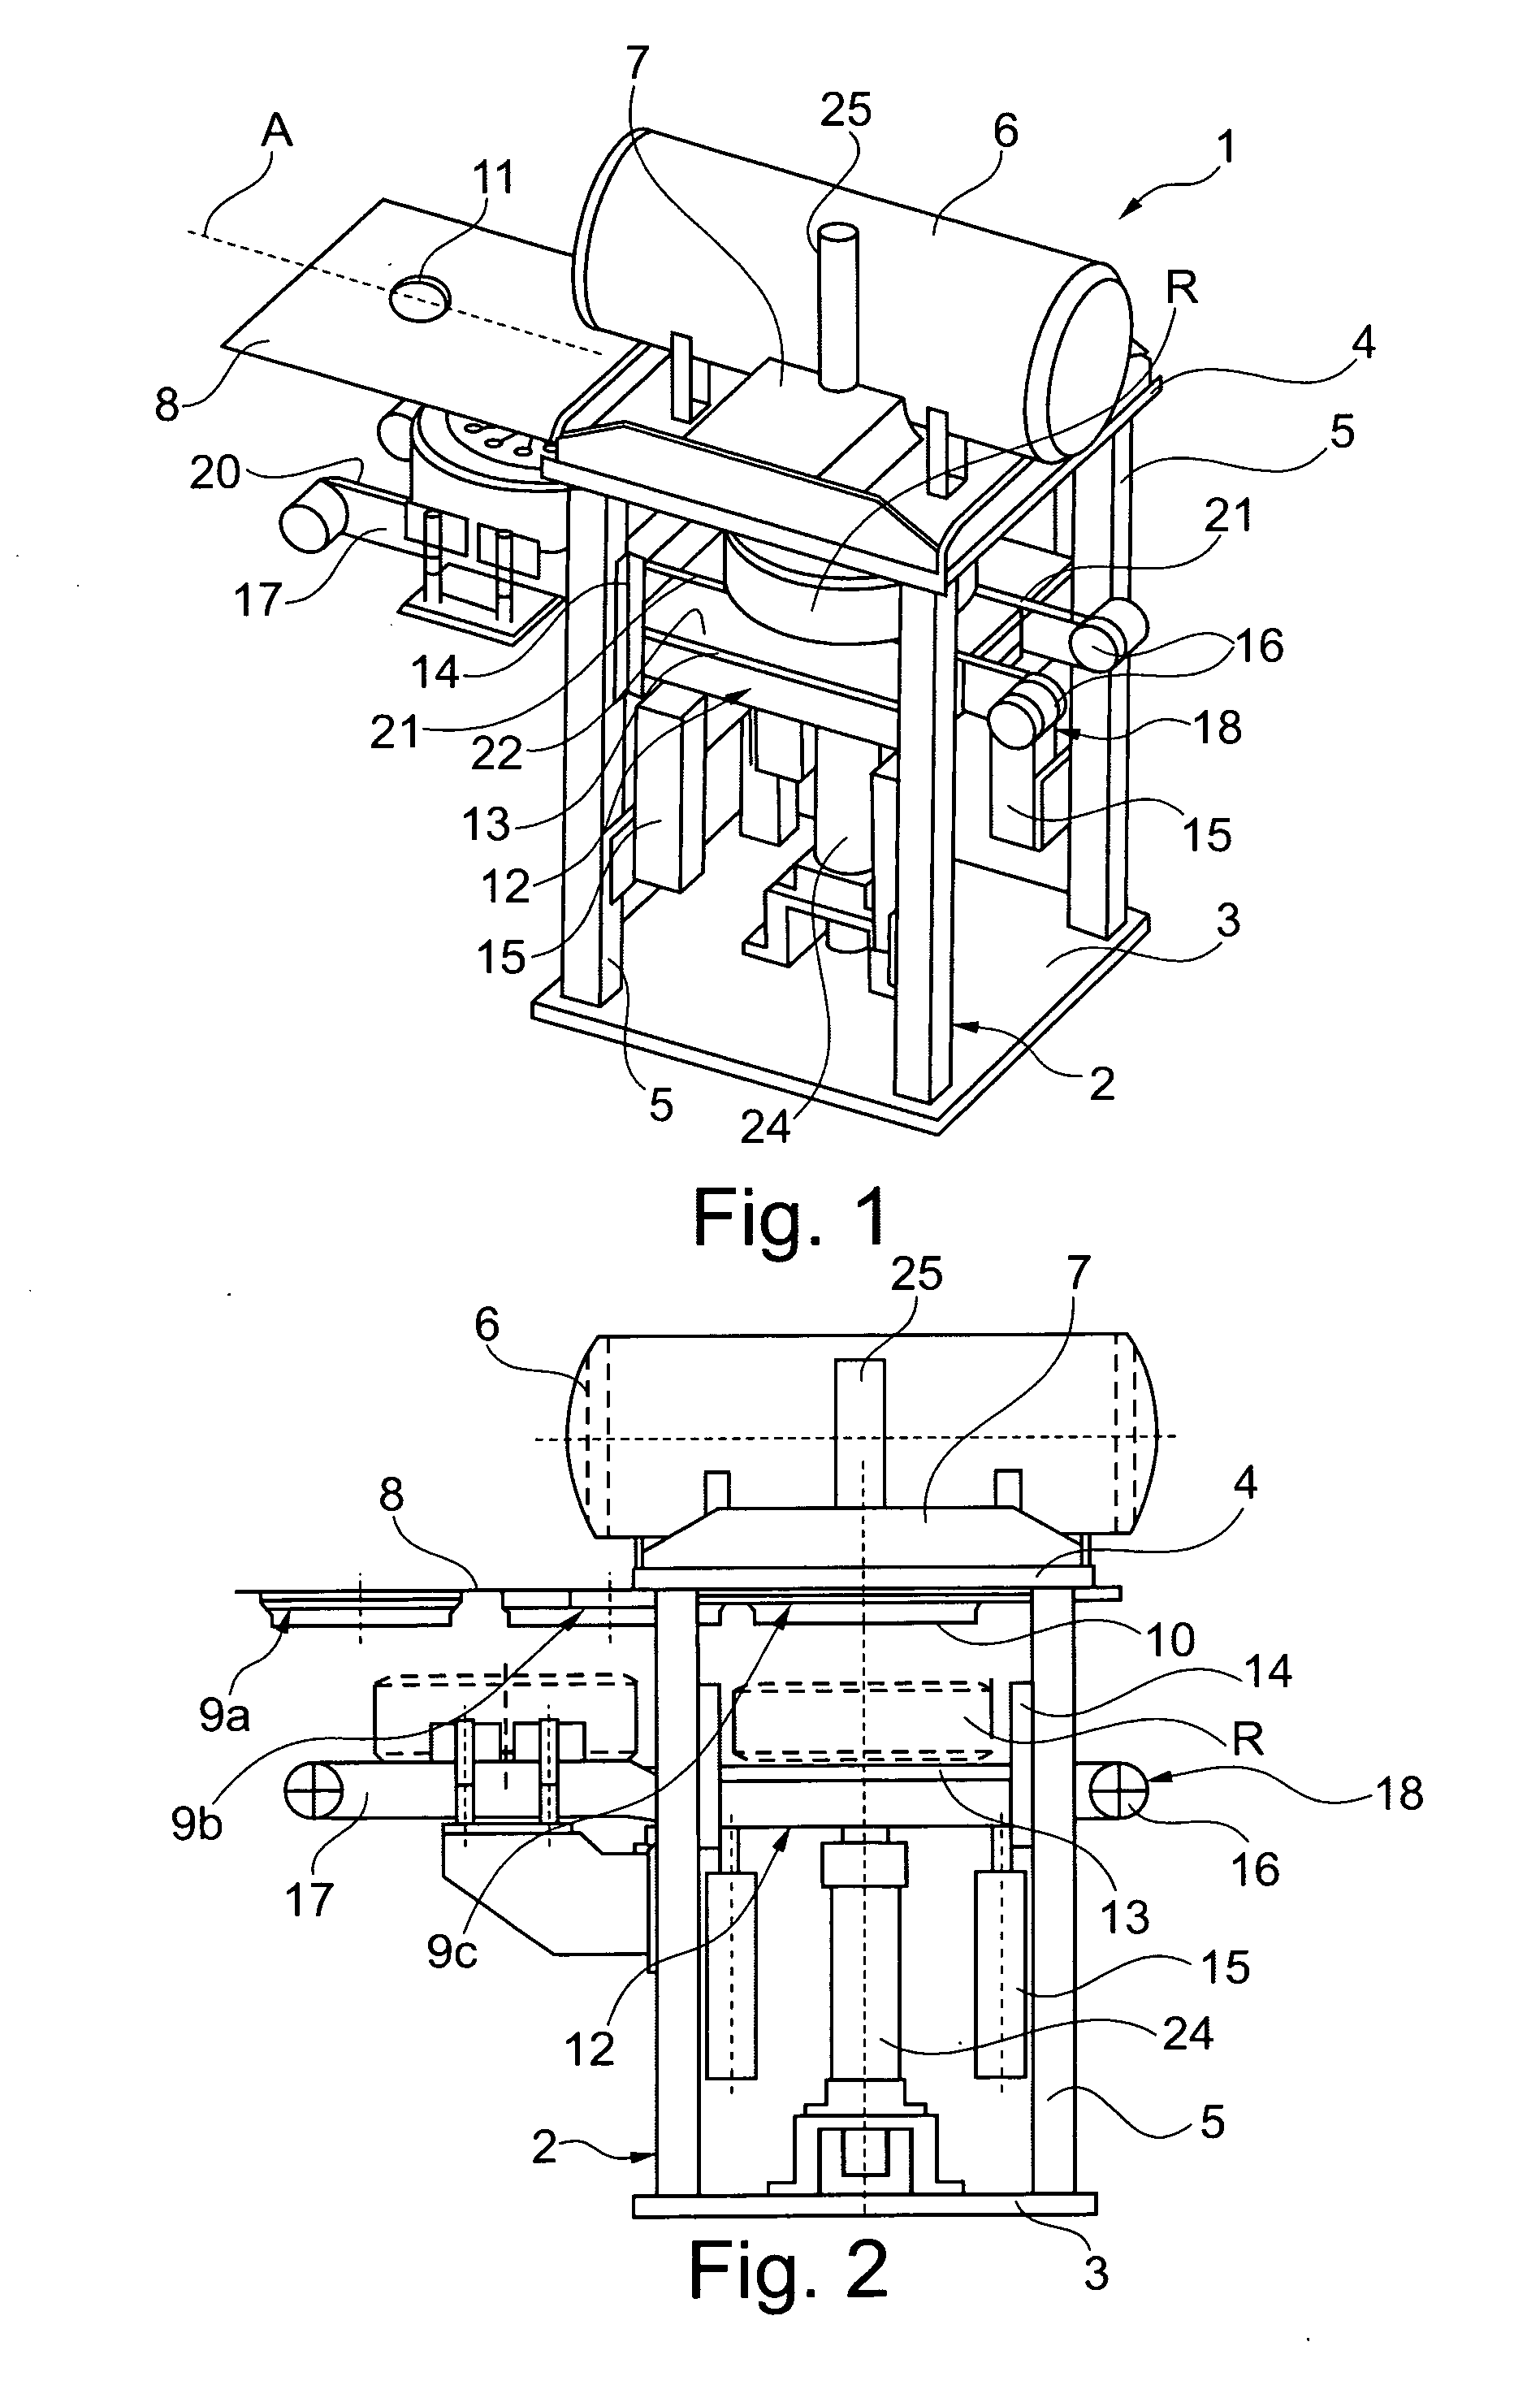 Tire inflating station and method for inflating tires